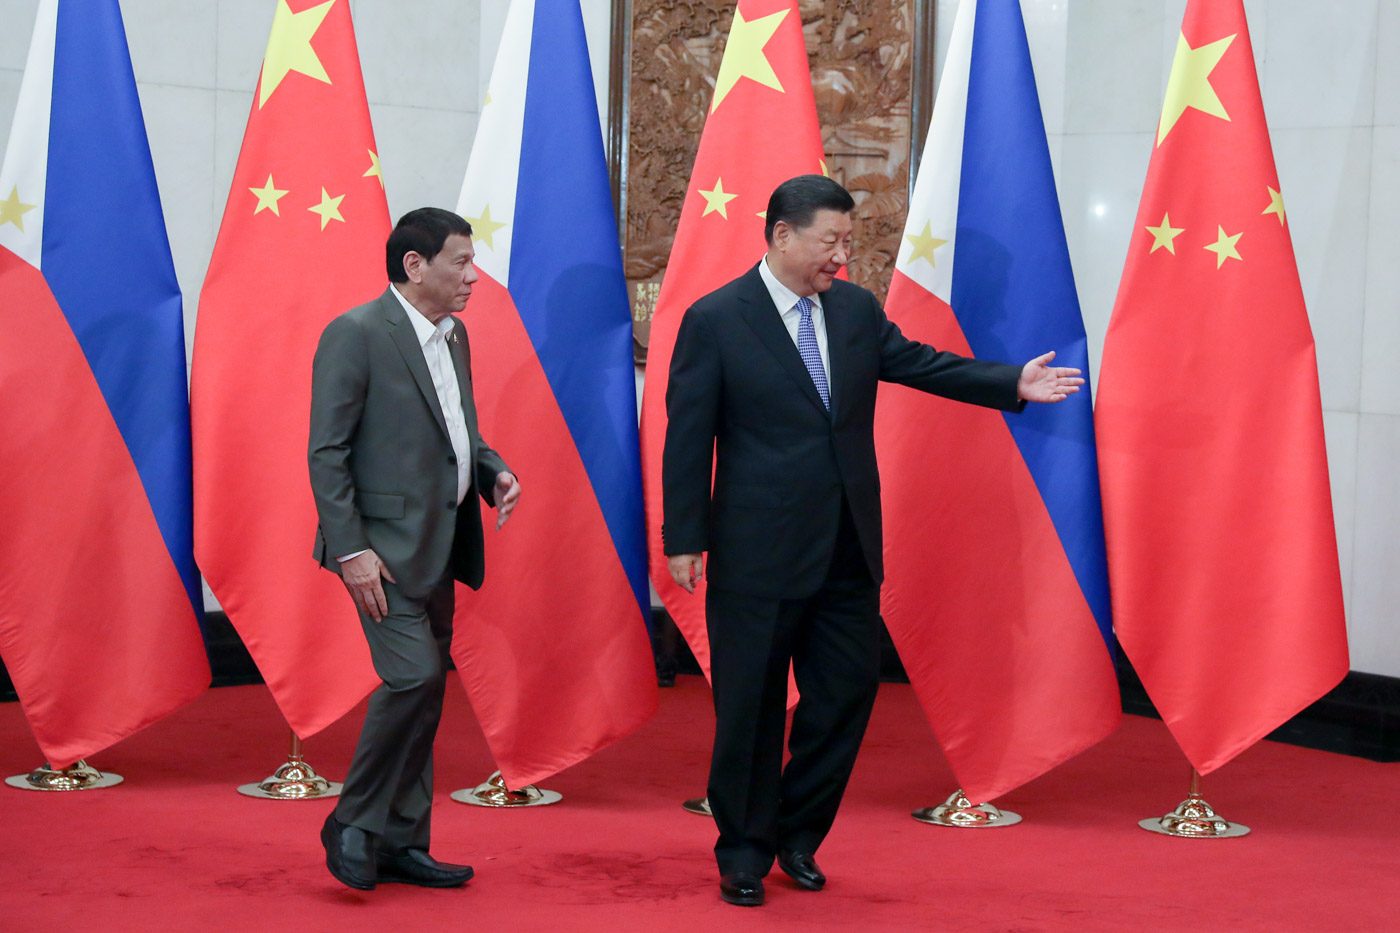 Xi refuses to recognize Hague ruling after Duterte brings it up